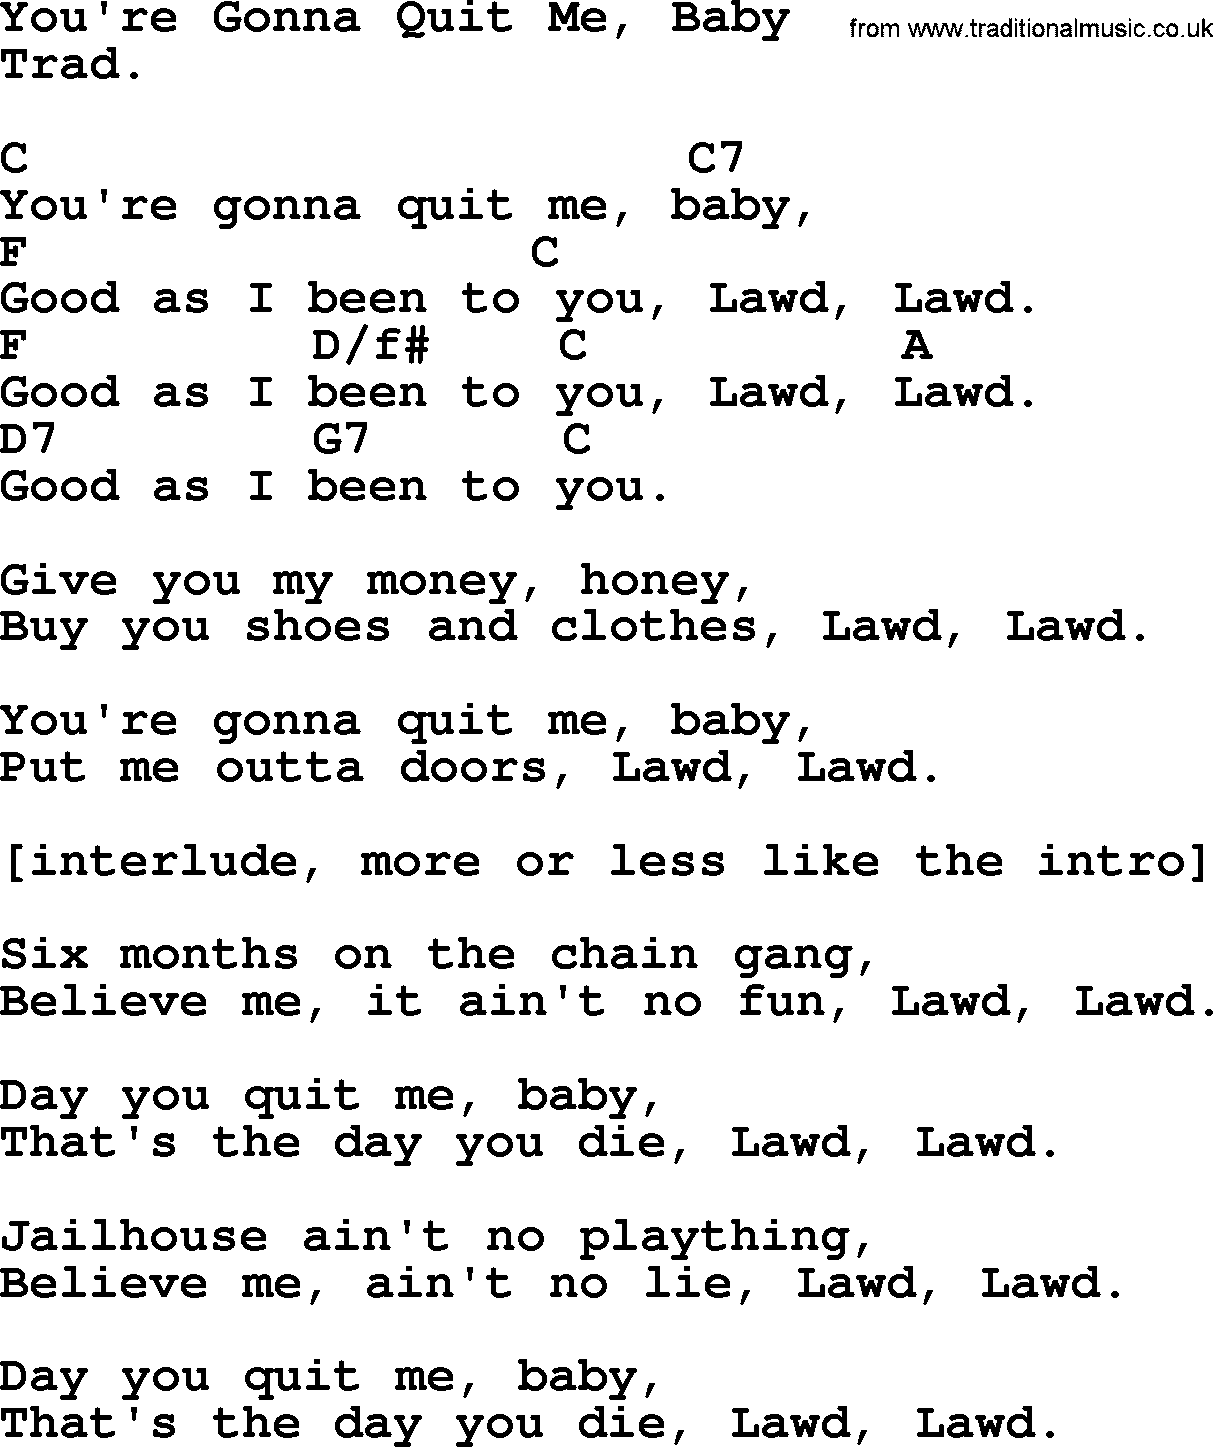 Top 1000 Most Popular Folk and Old-time Songs: You're Gonna Quit Me, Baby, lyrics and chords